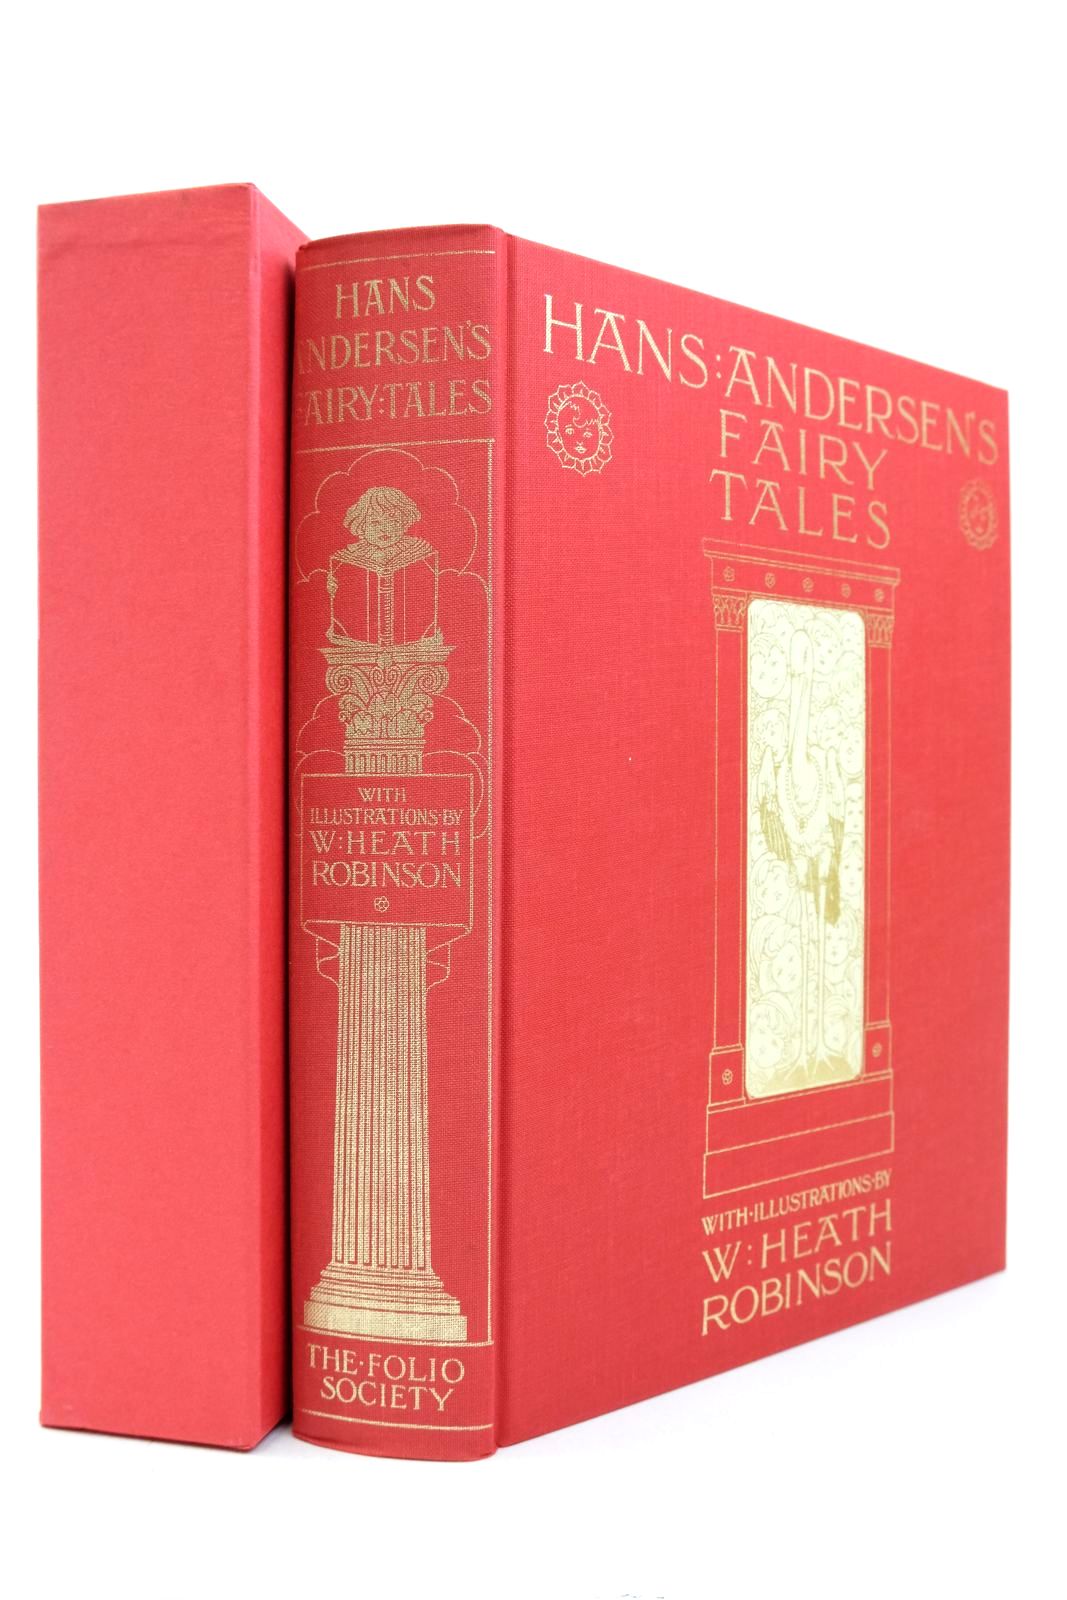 Photo of HANS ANDERSEN'S FAIRY TALES written by Andersen, Hans Christian illustrated by Robinson, W. Heath published by Folio Society (STOCK CODE: 2140567)  for sale by Stella & Rose's Books